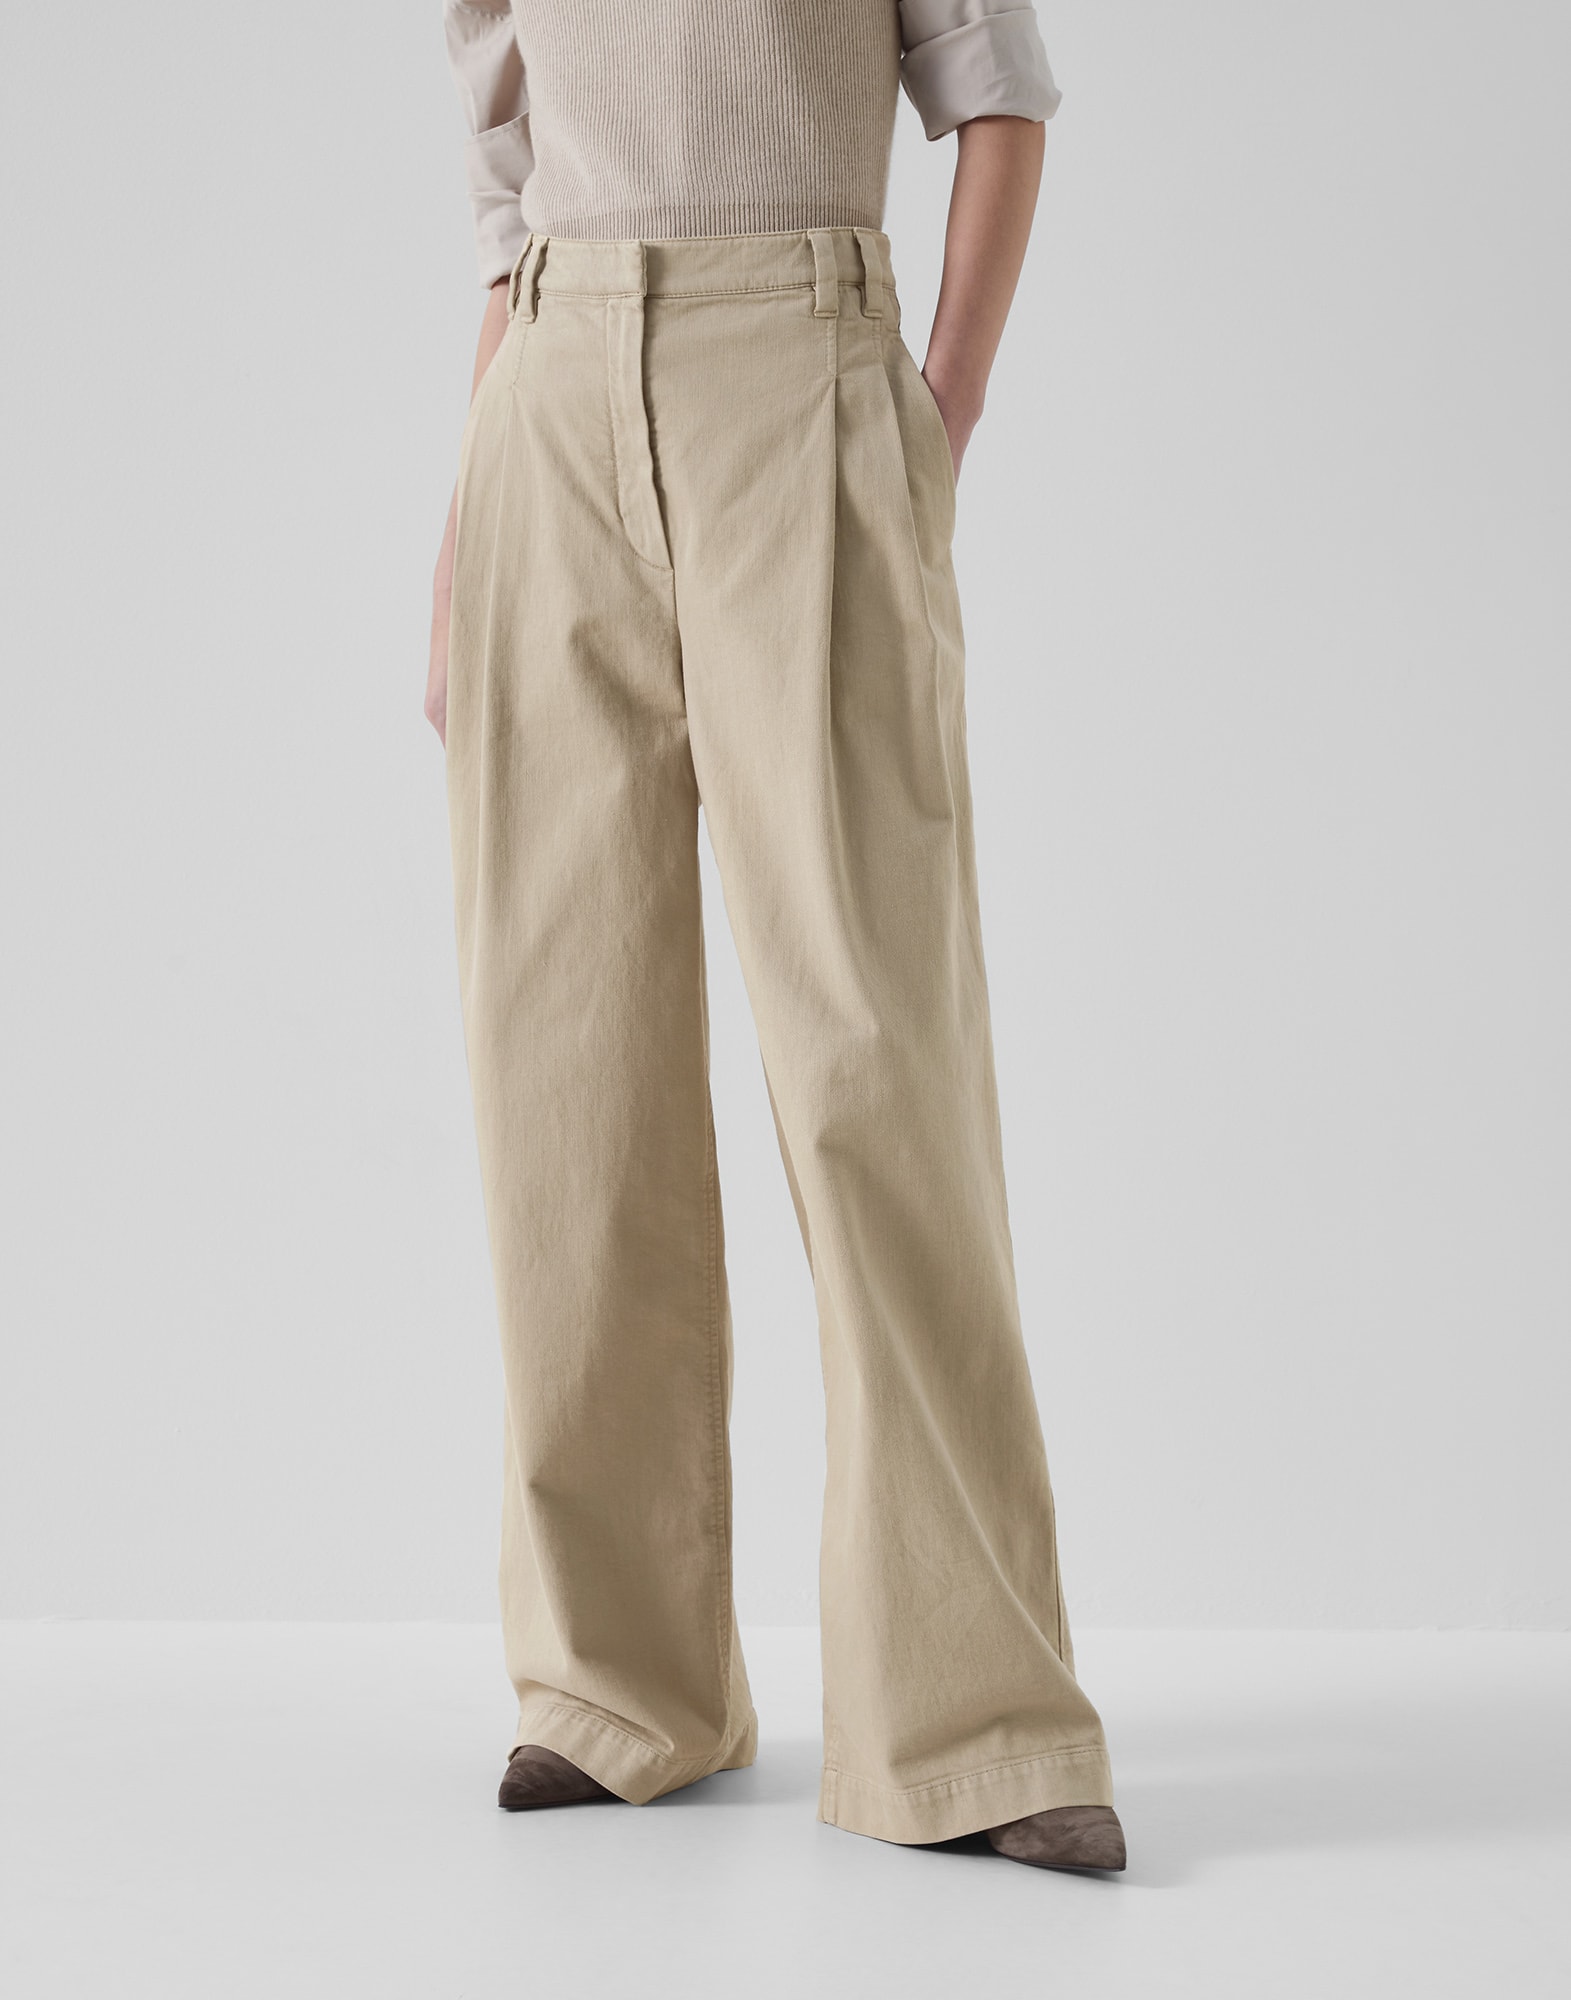 Dyed denim trousers Mou Woman -
                        Brunello Cucinelli
                    